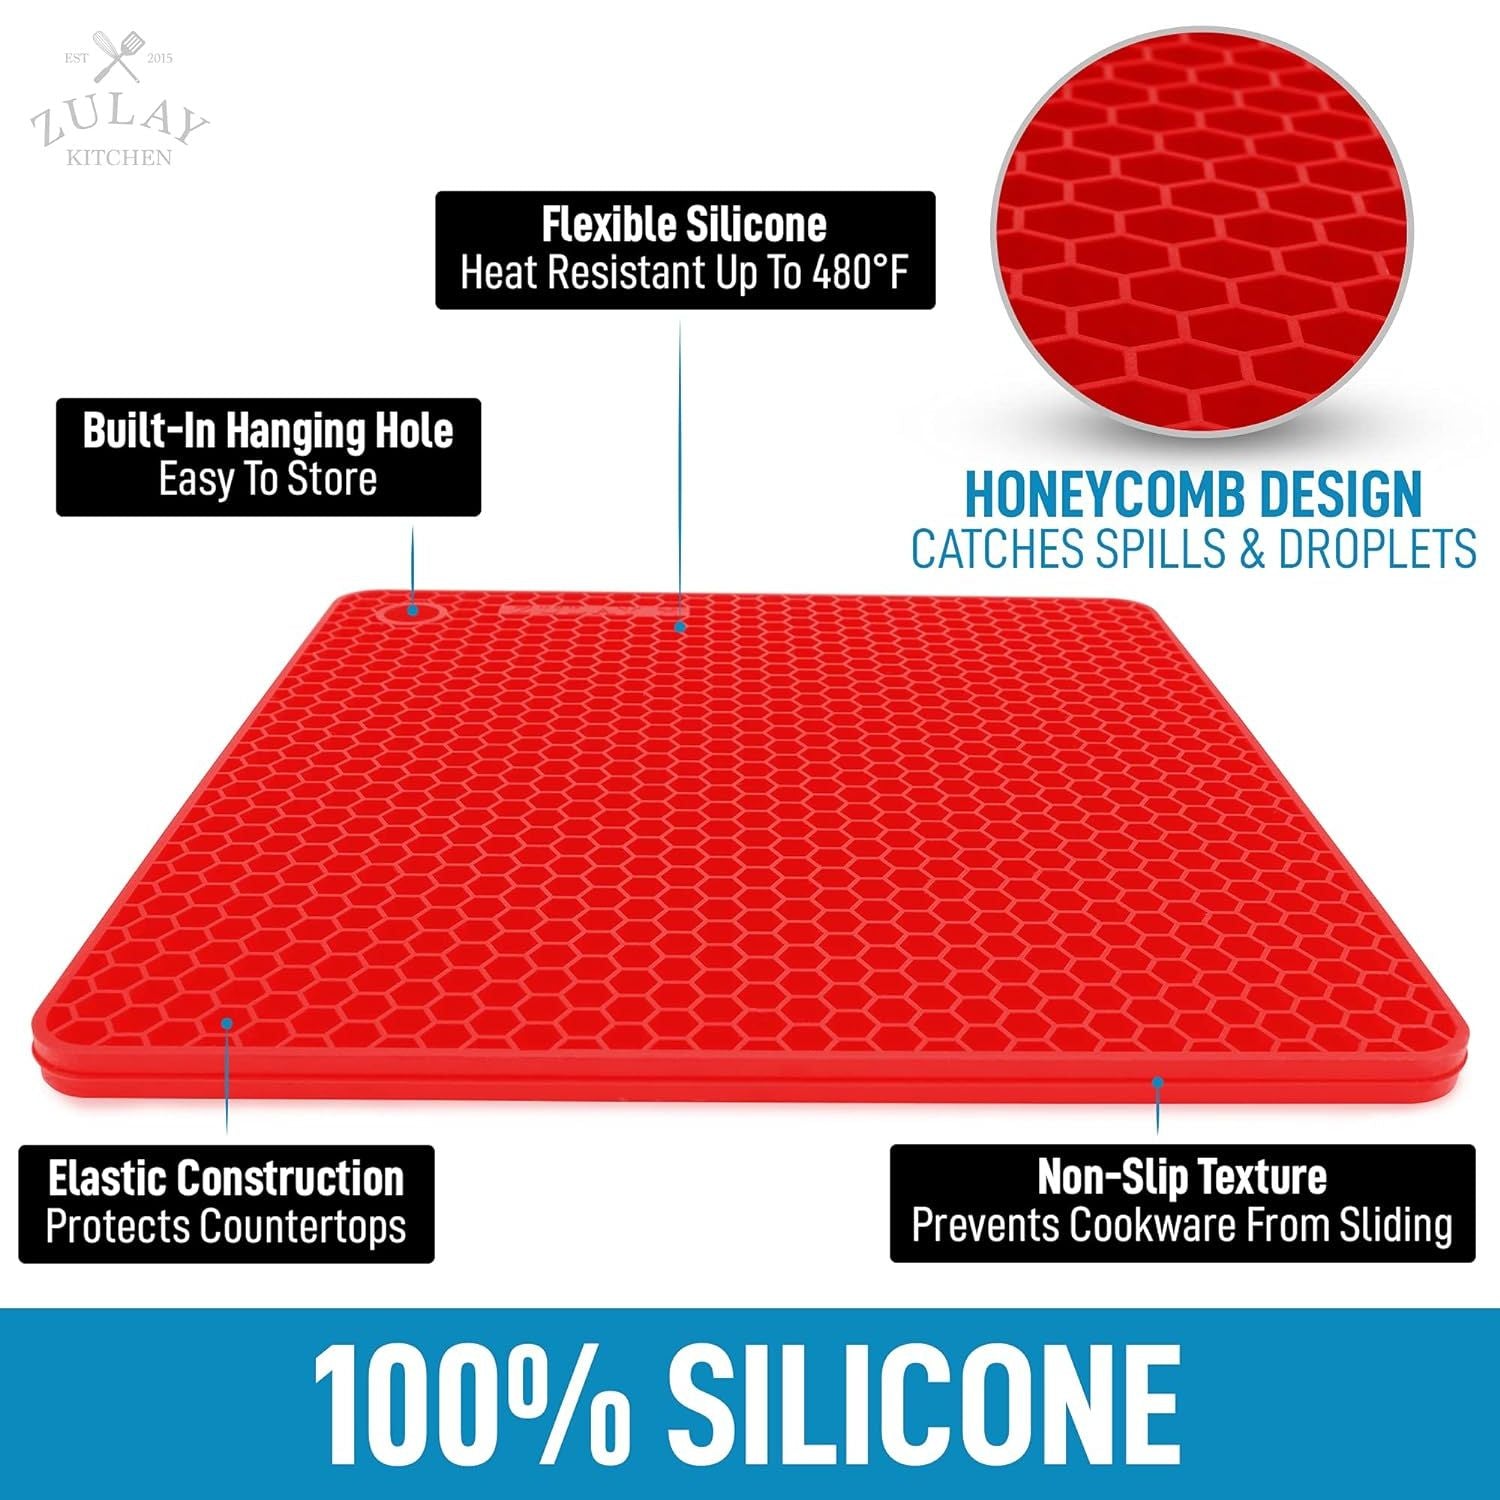 Silicone trivet by Zulay Kitchen